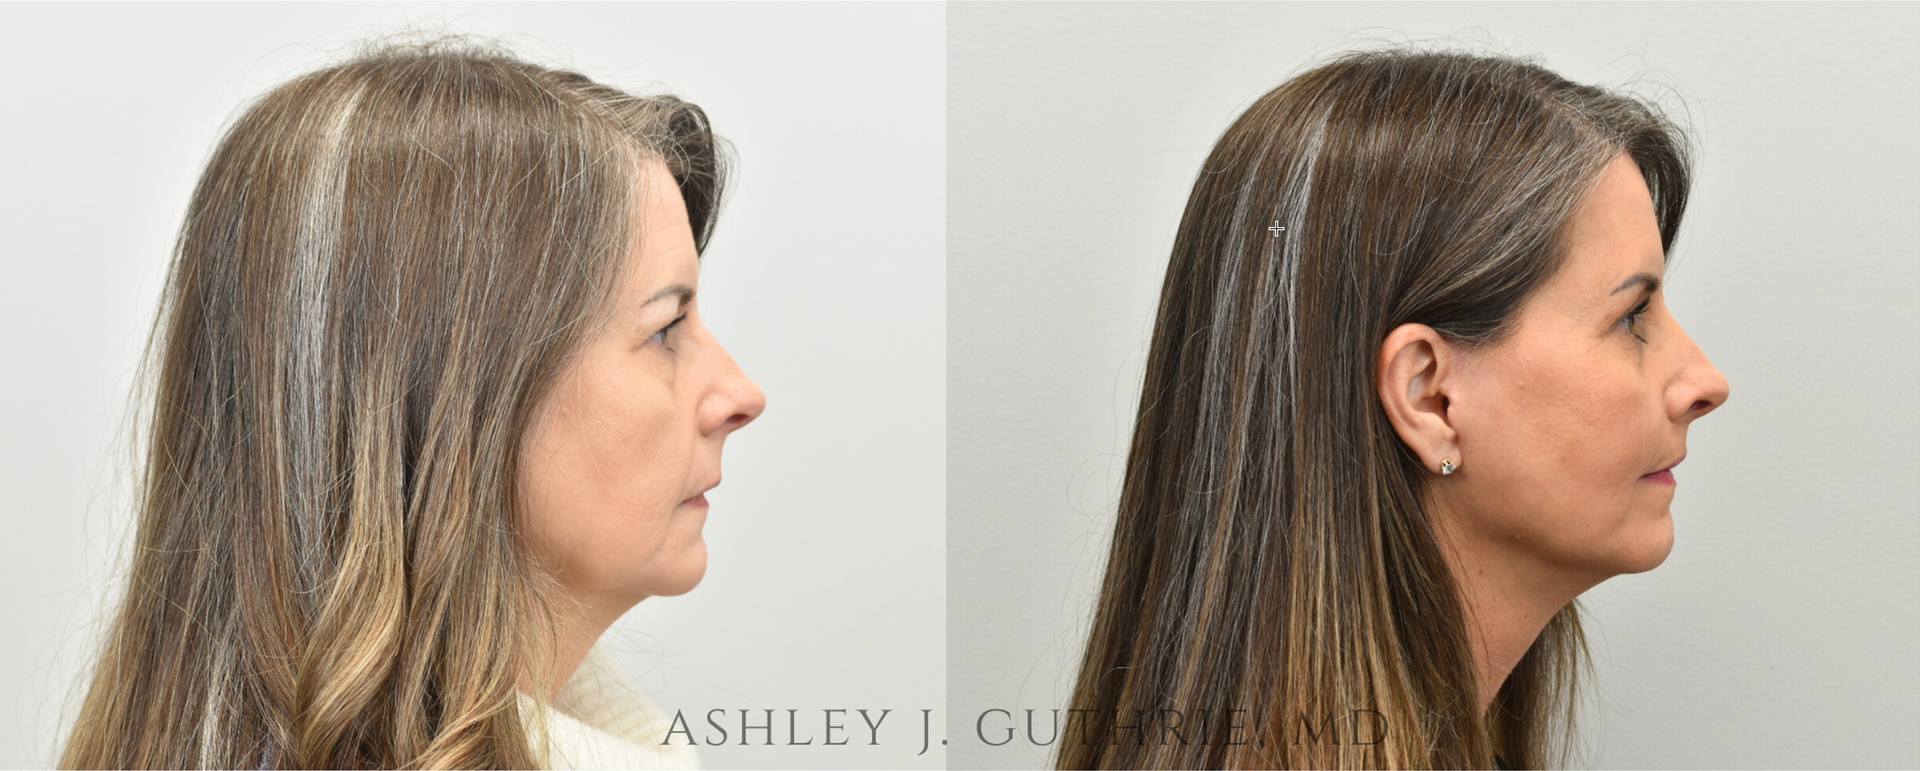 Facelift / Deep Plane - Before & After